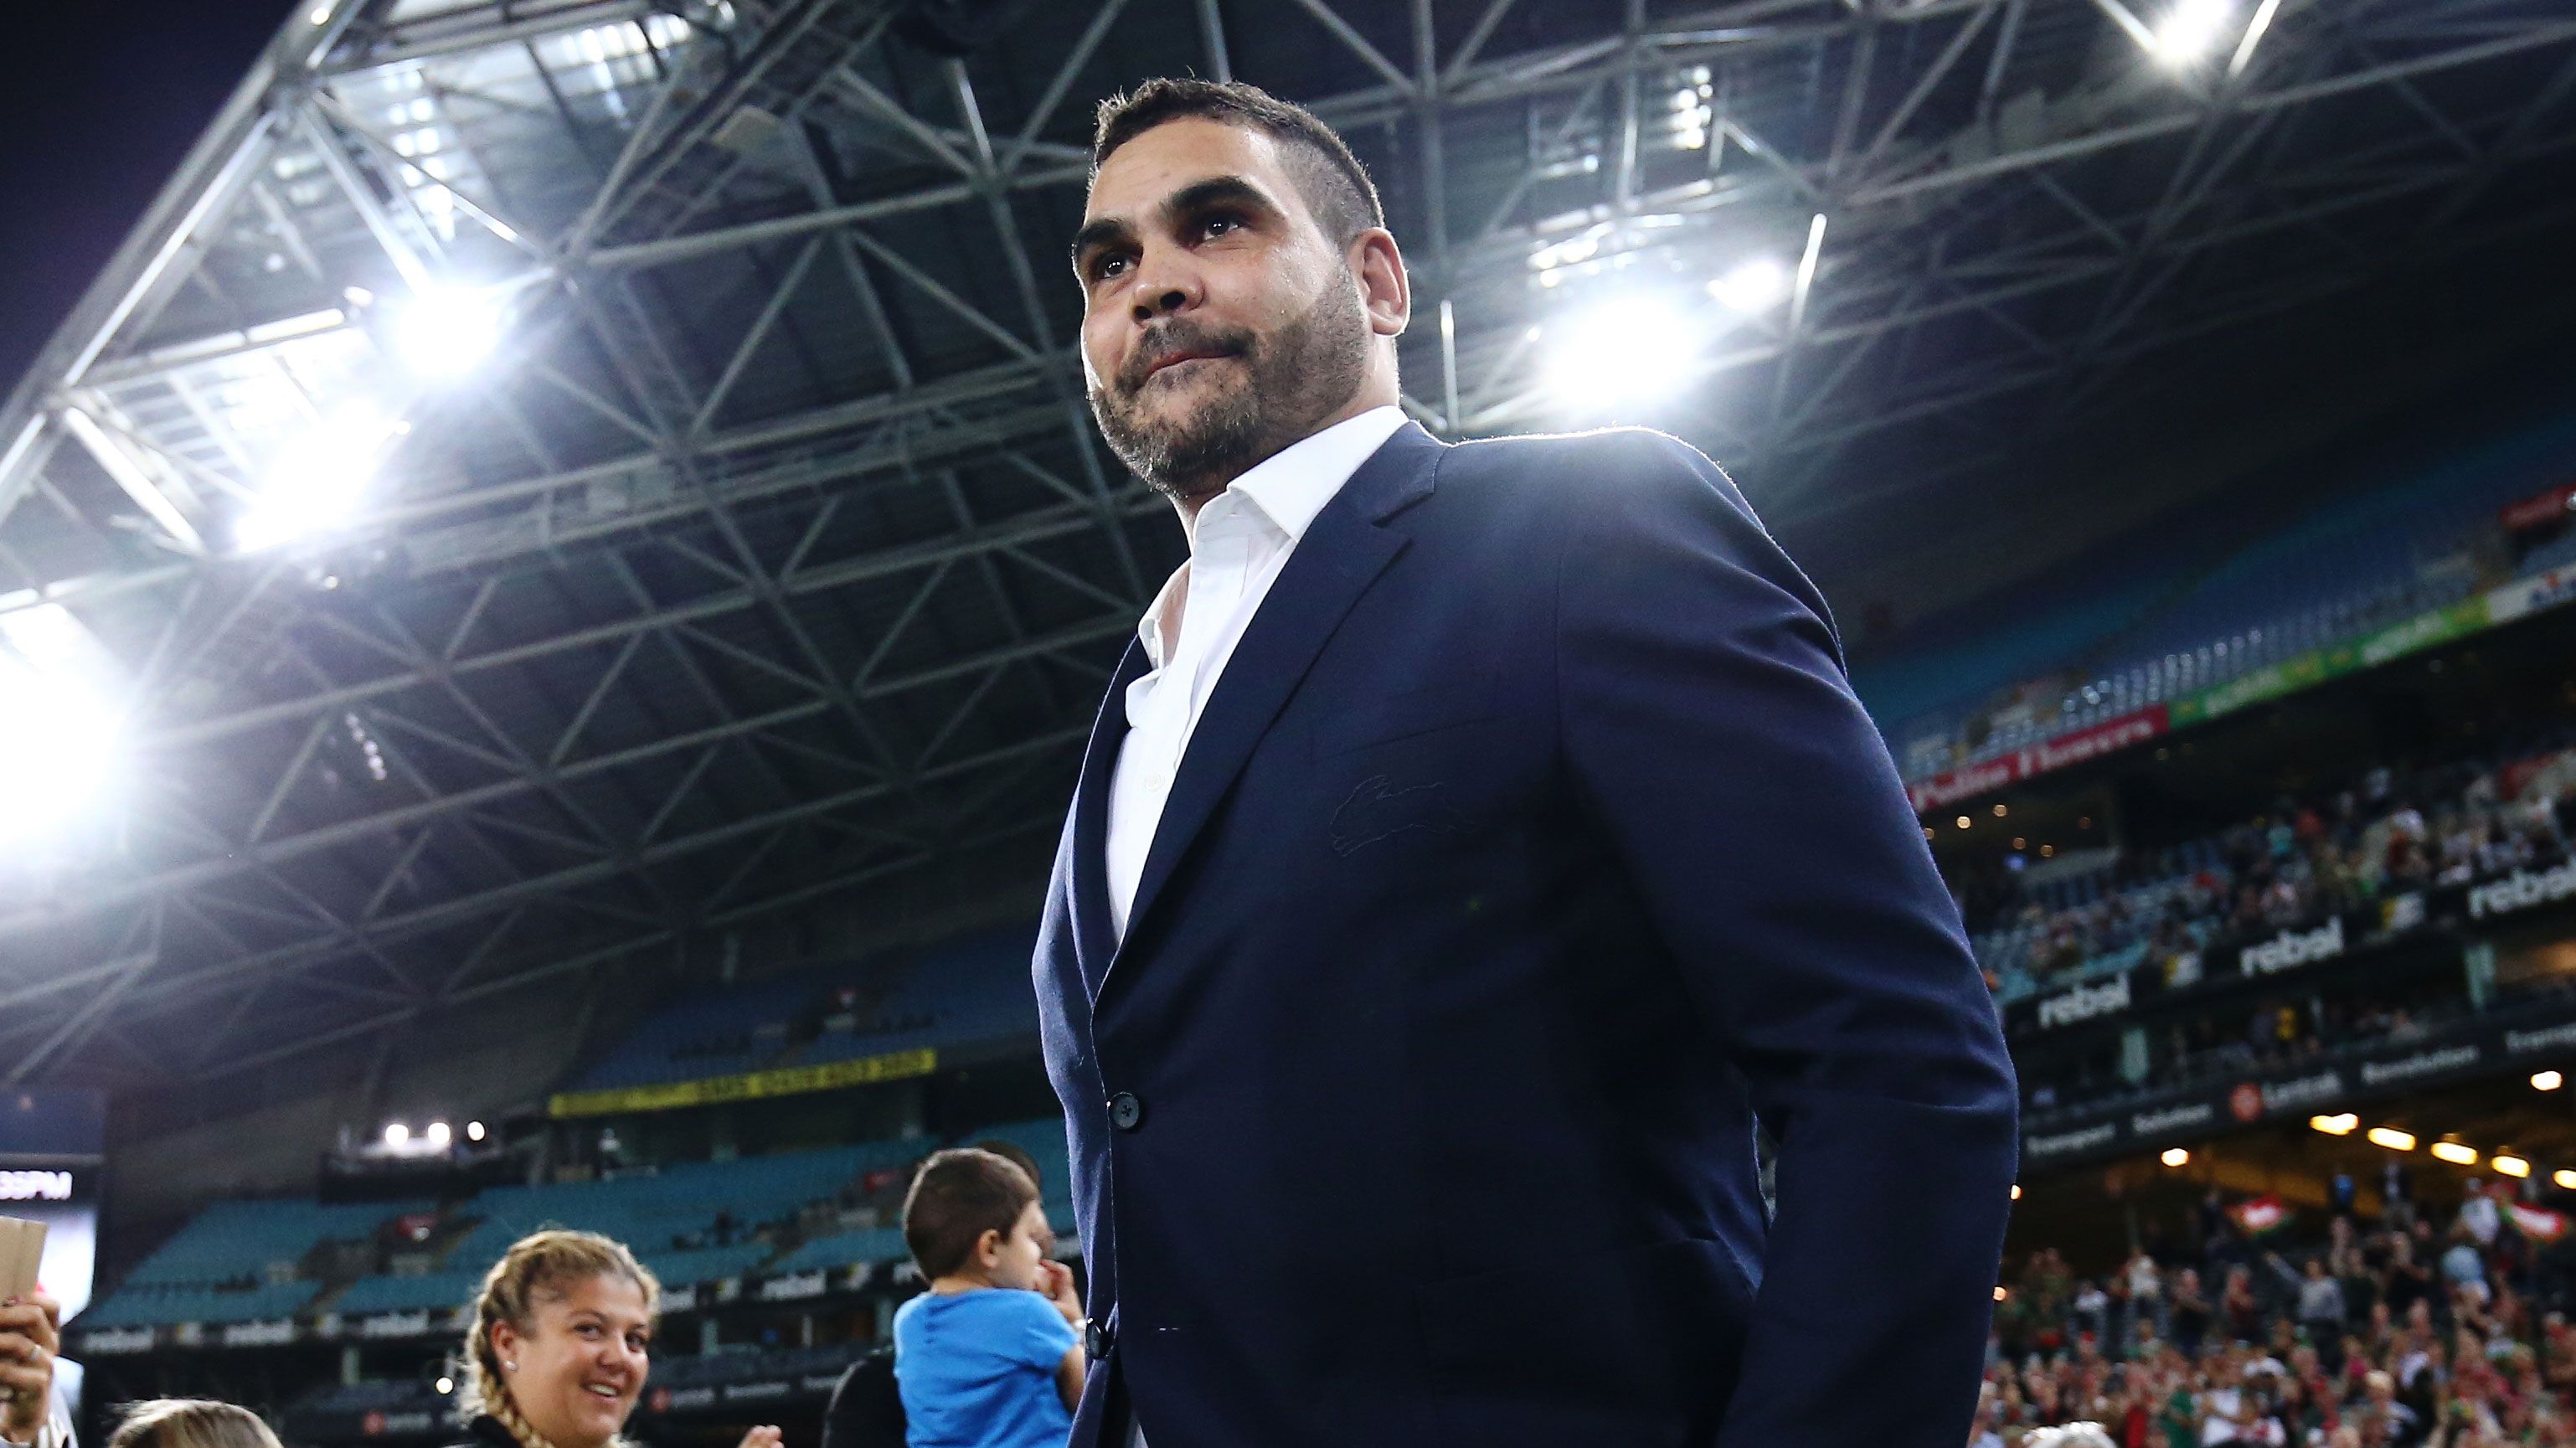 Rabbitohs legend Greg Inglis' shock new role with rival NRL club